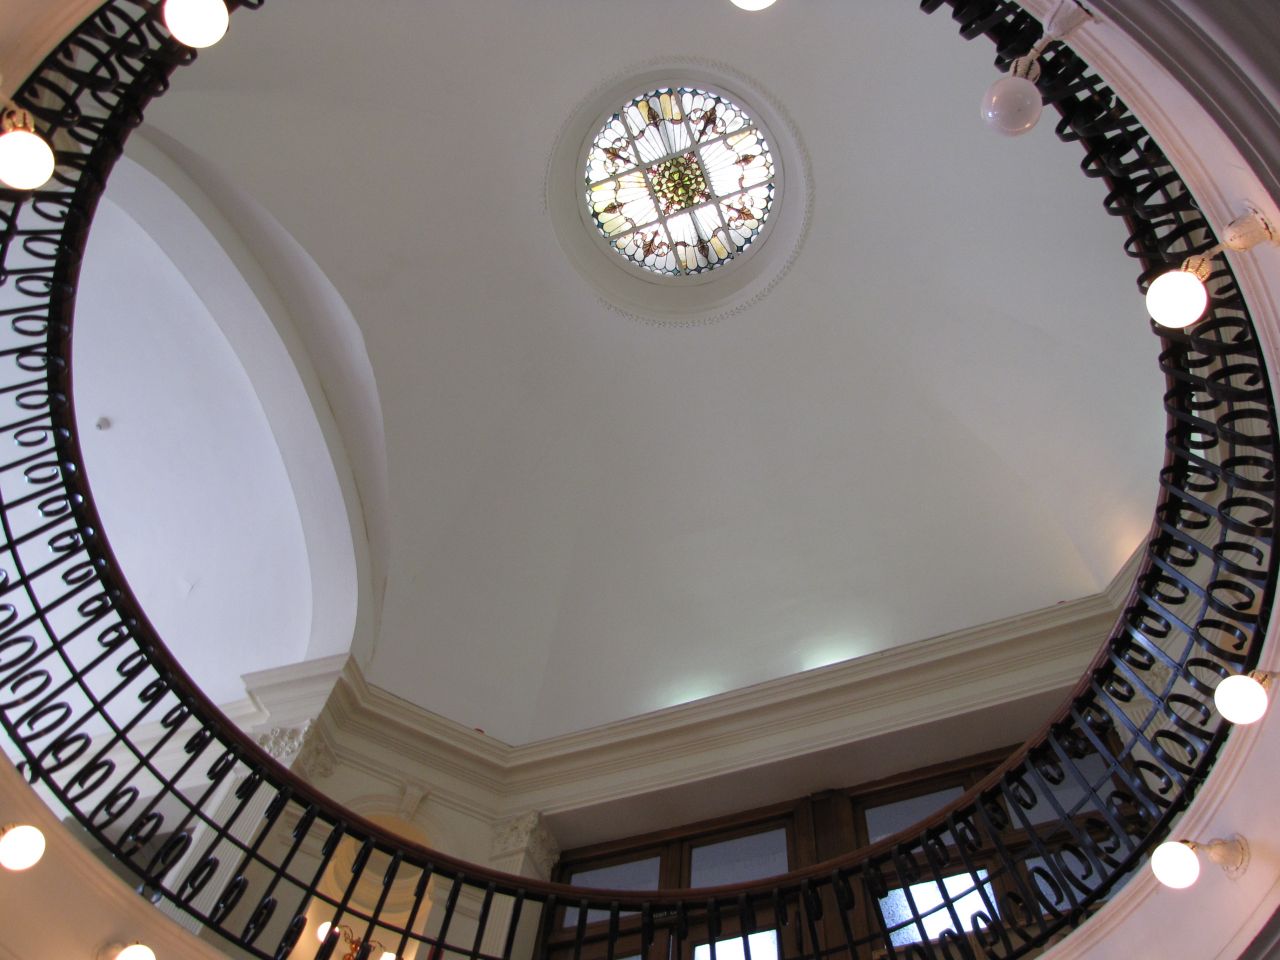 Looking up to the third-floor skylight